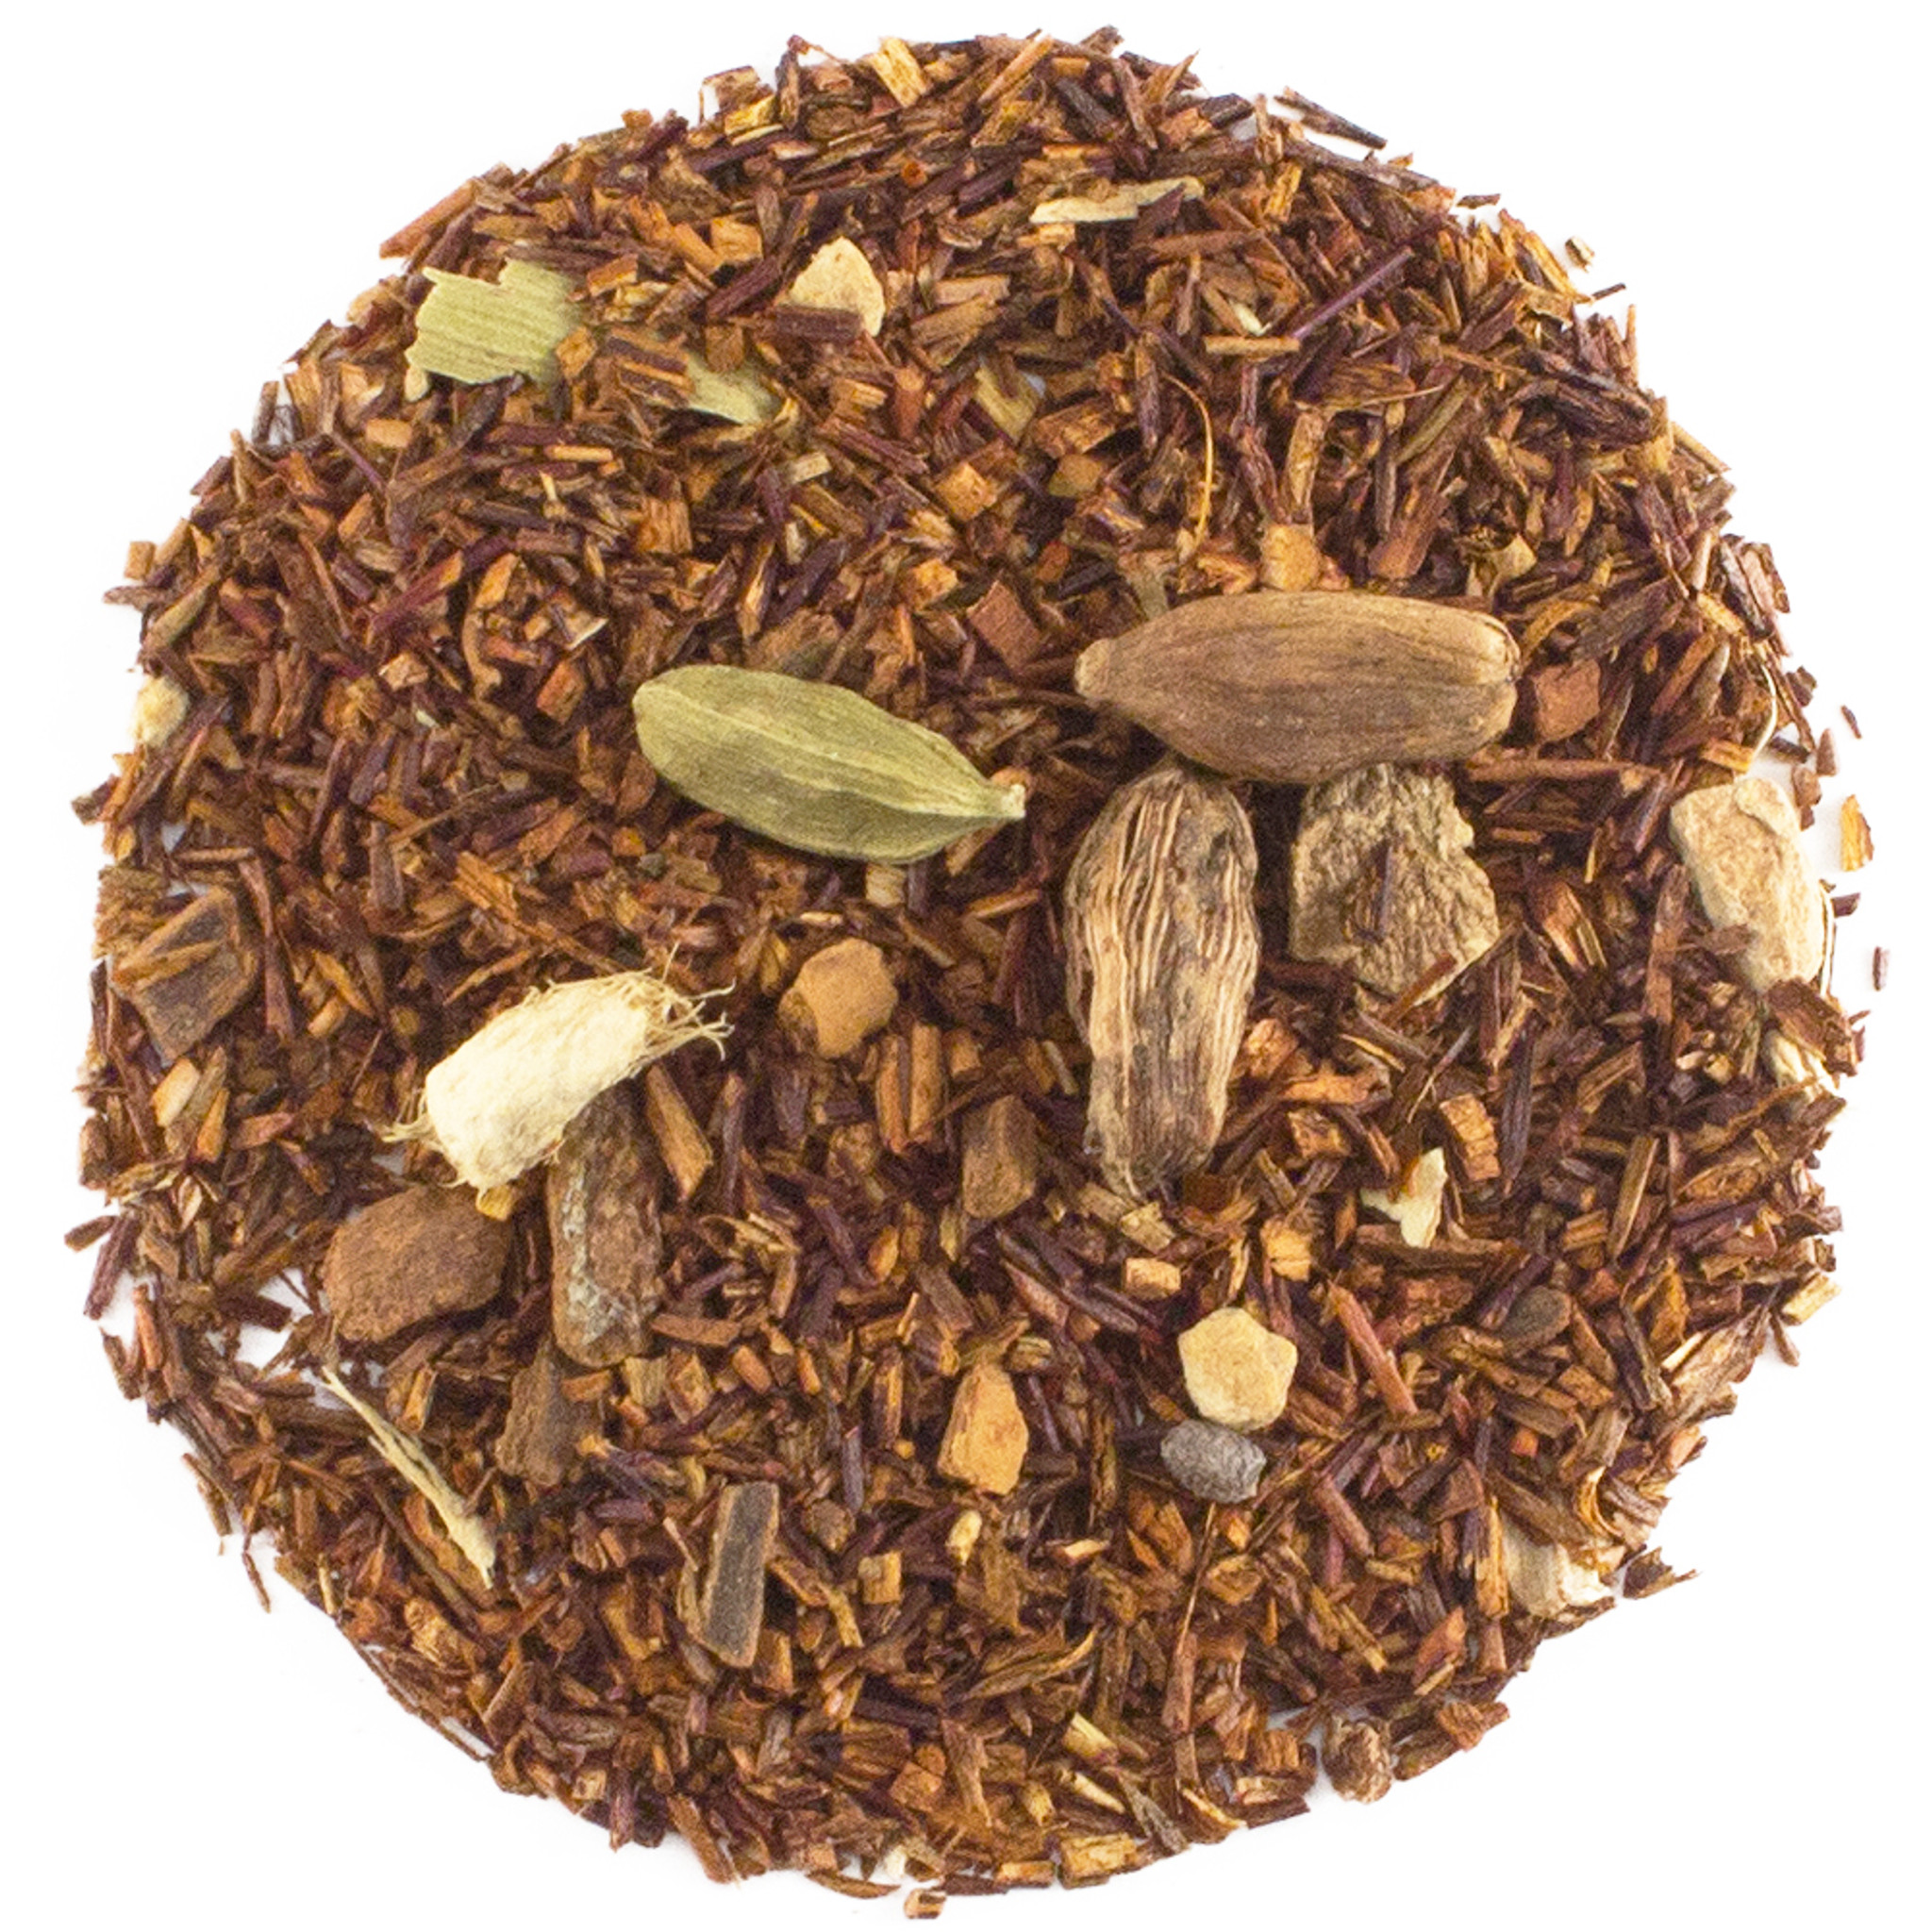 Rooibos, red tea or rooibos infusion? What name to use?